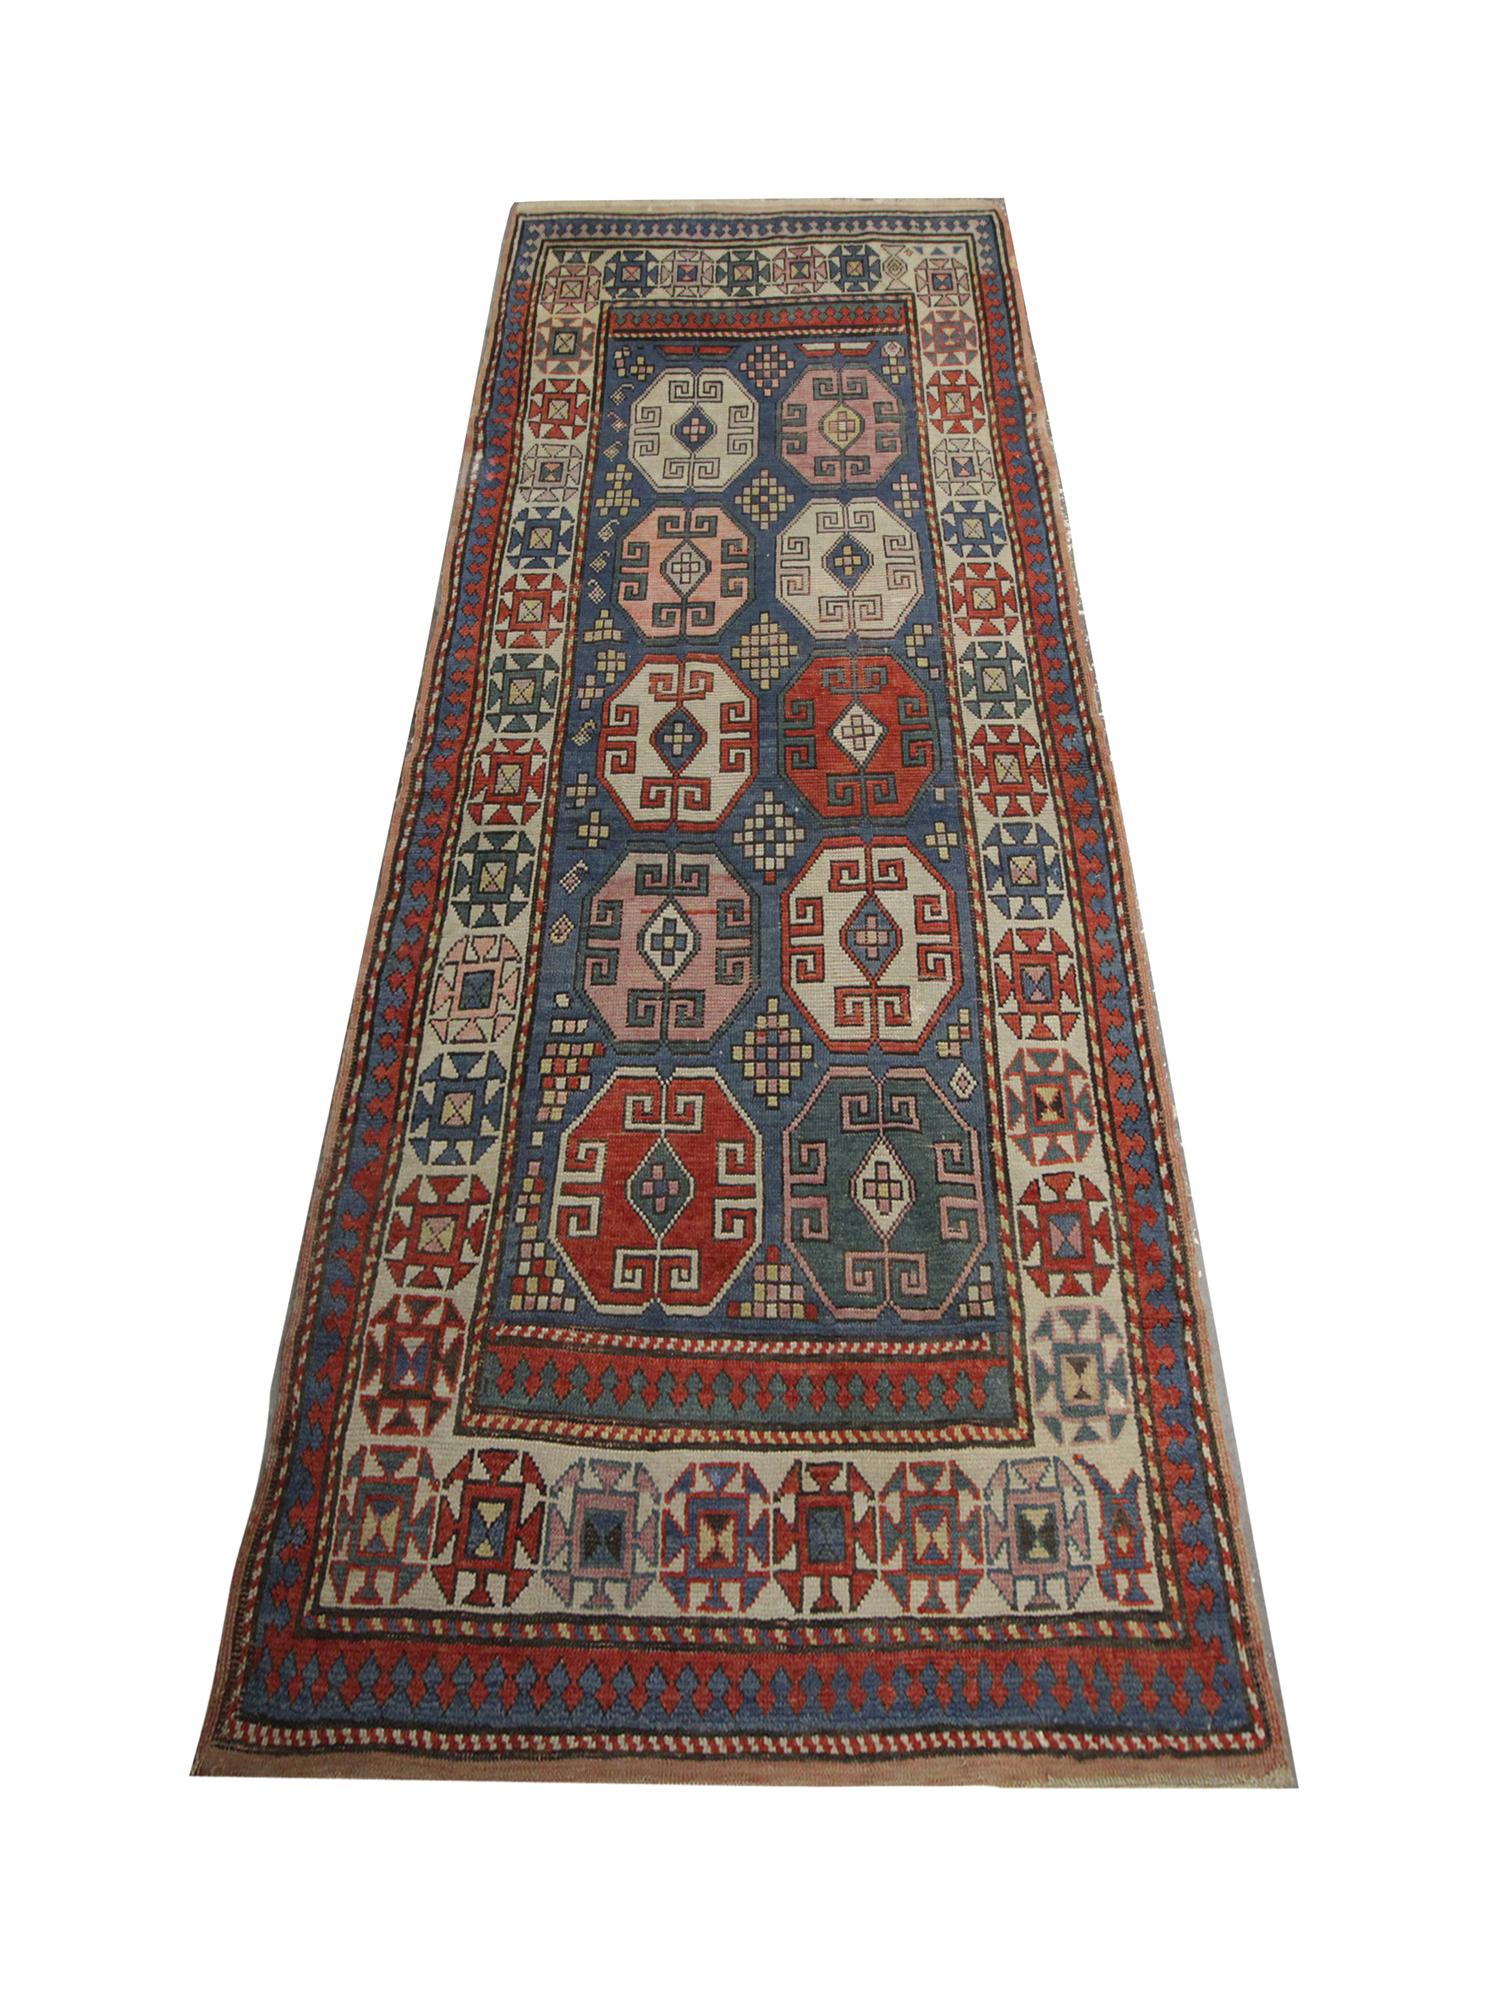 This Caucasian antique rug, Azerbaijan area rug features asymmetrical design. The centre features ten octagon emblems with interwoven patterns on a background of blue surrounded by further geometric details. This handmade carpet oriental rug is then